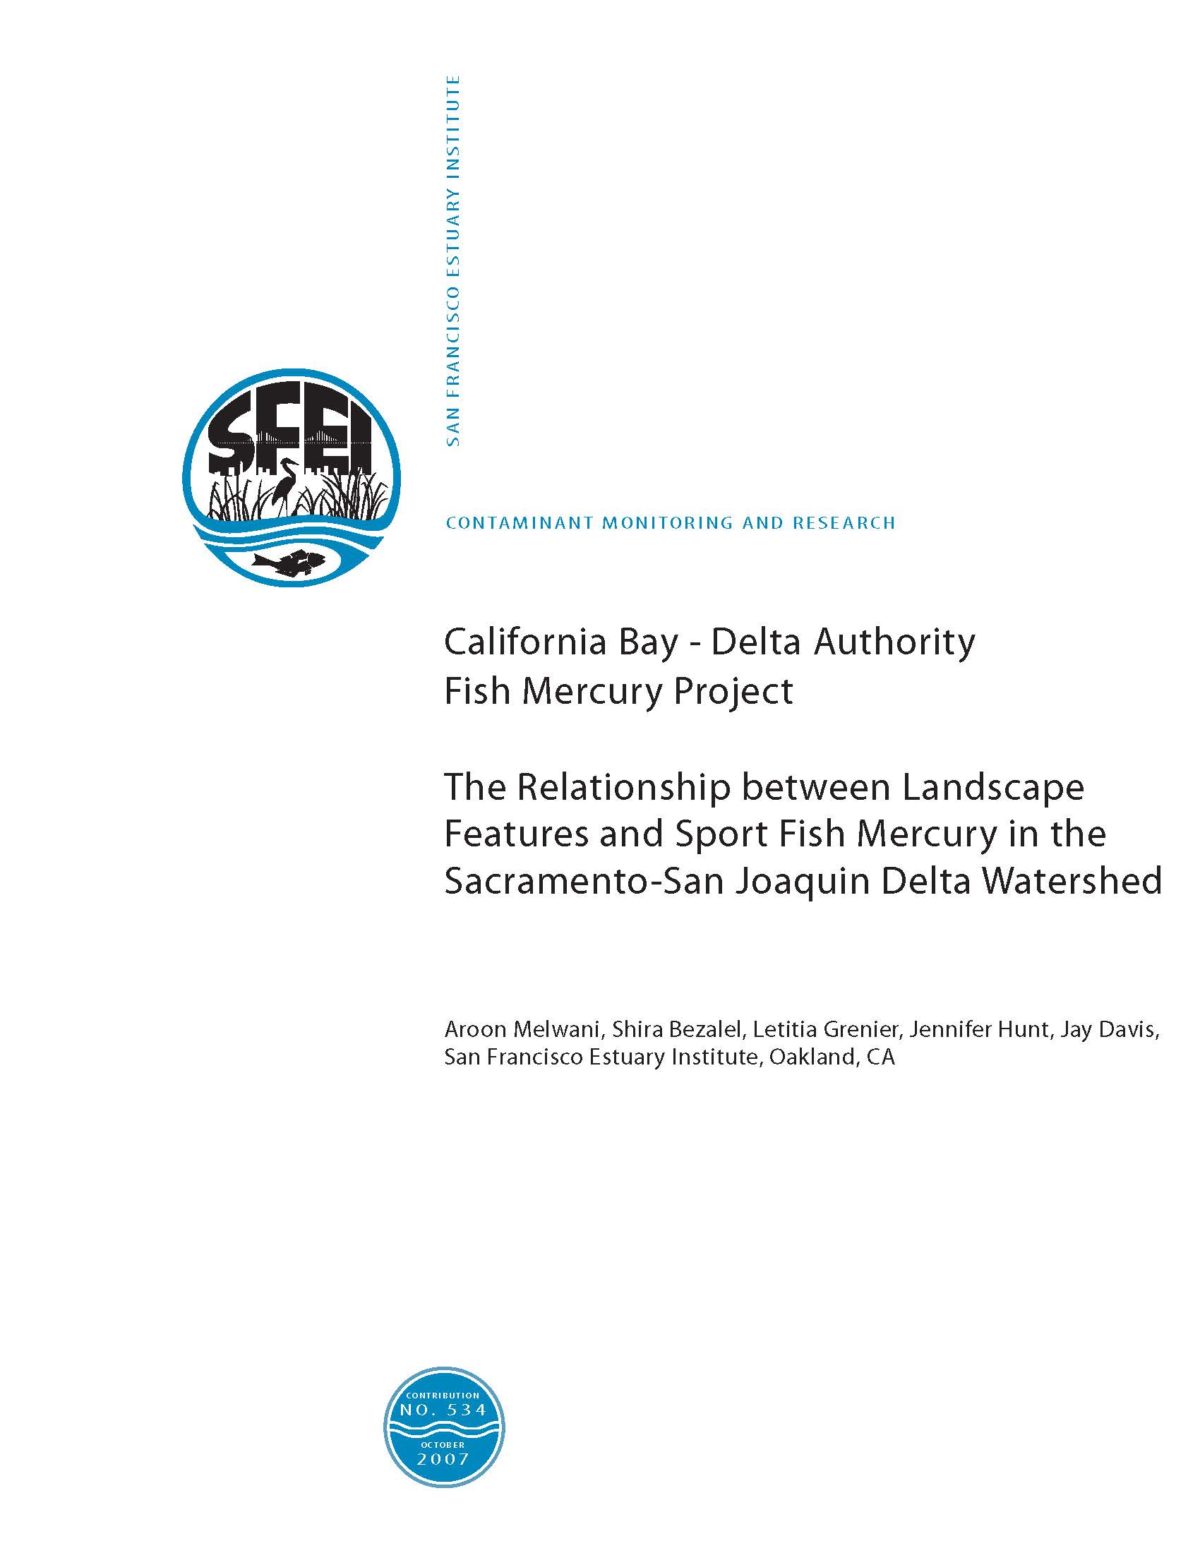 California Bay – Delta Authority Fish Mercury Project: The Relationship between Landscape Features and Sport Fish Mercury in the Sacramento-San Joaquin Delta Watershed